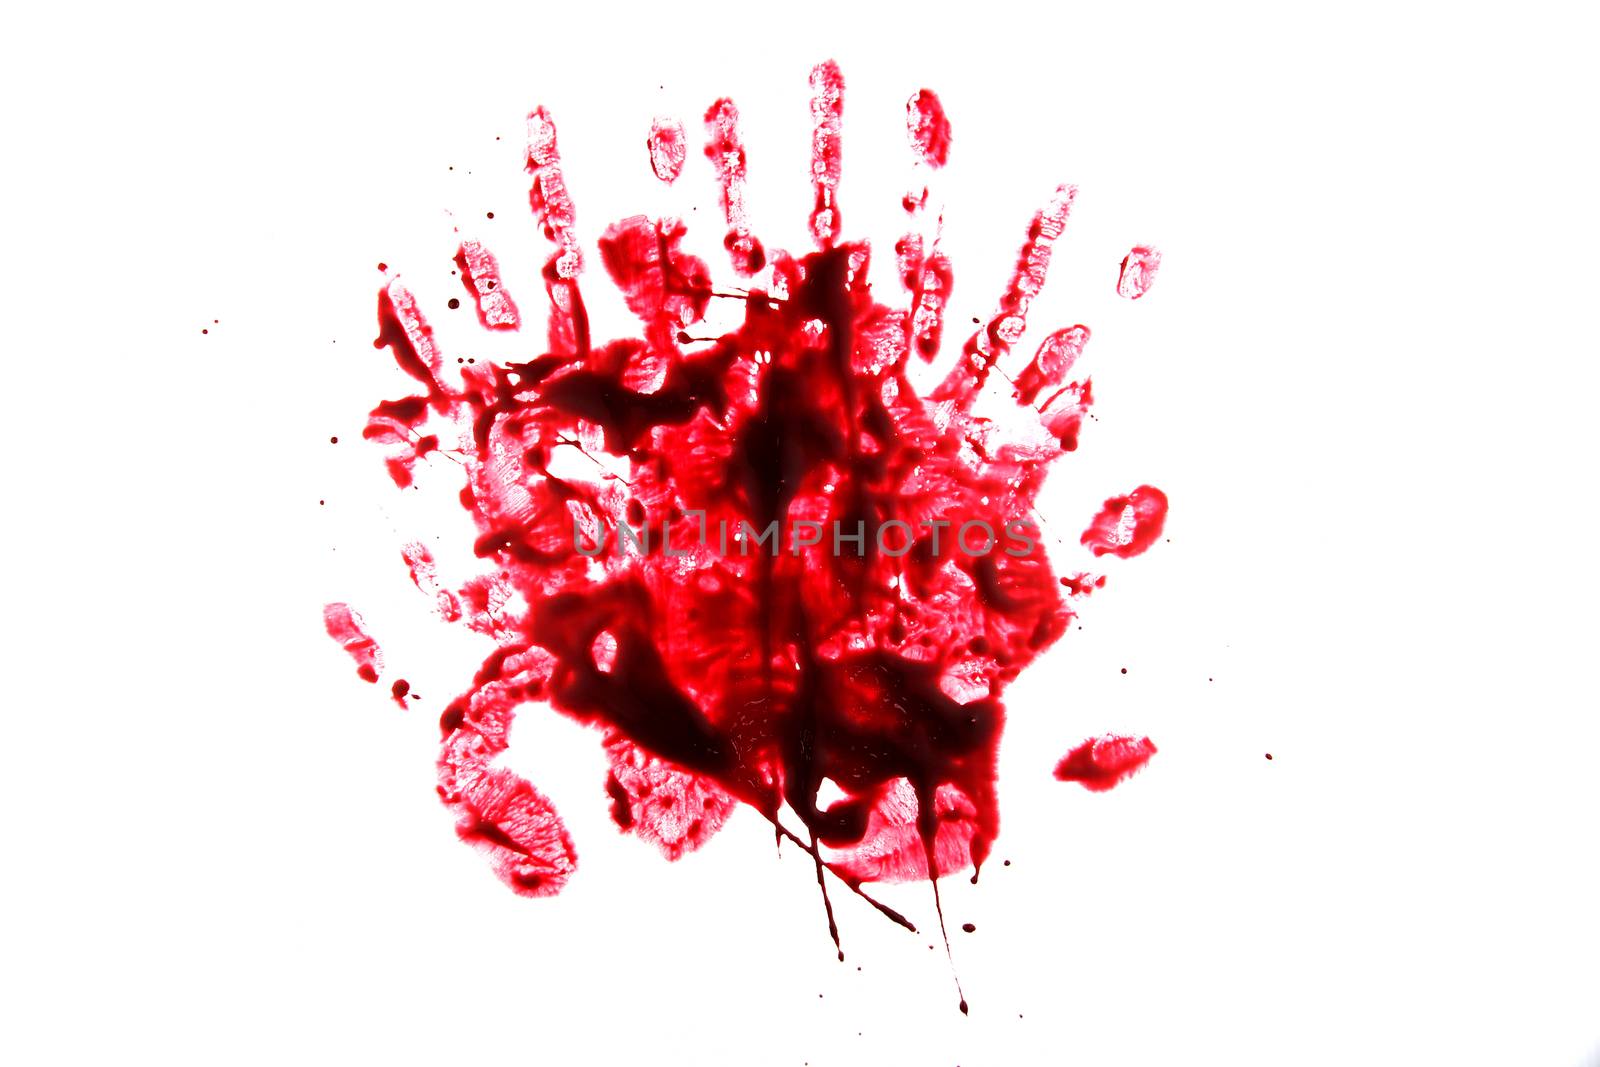 set 8. blood drop and bloodstains on isolated white background for horror content.